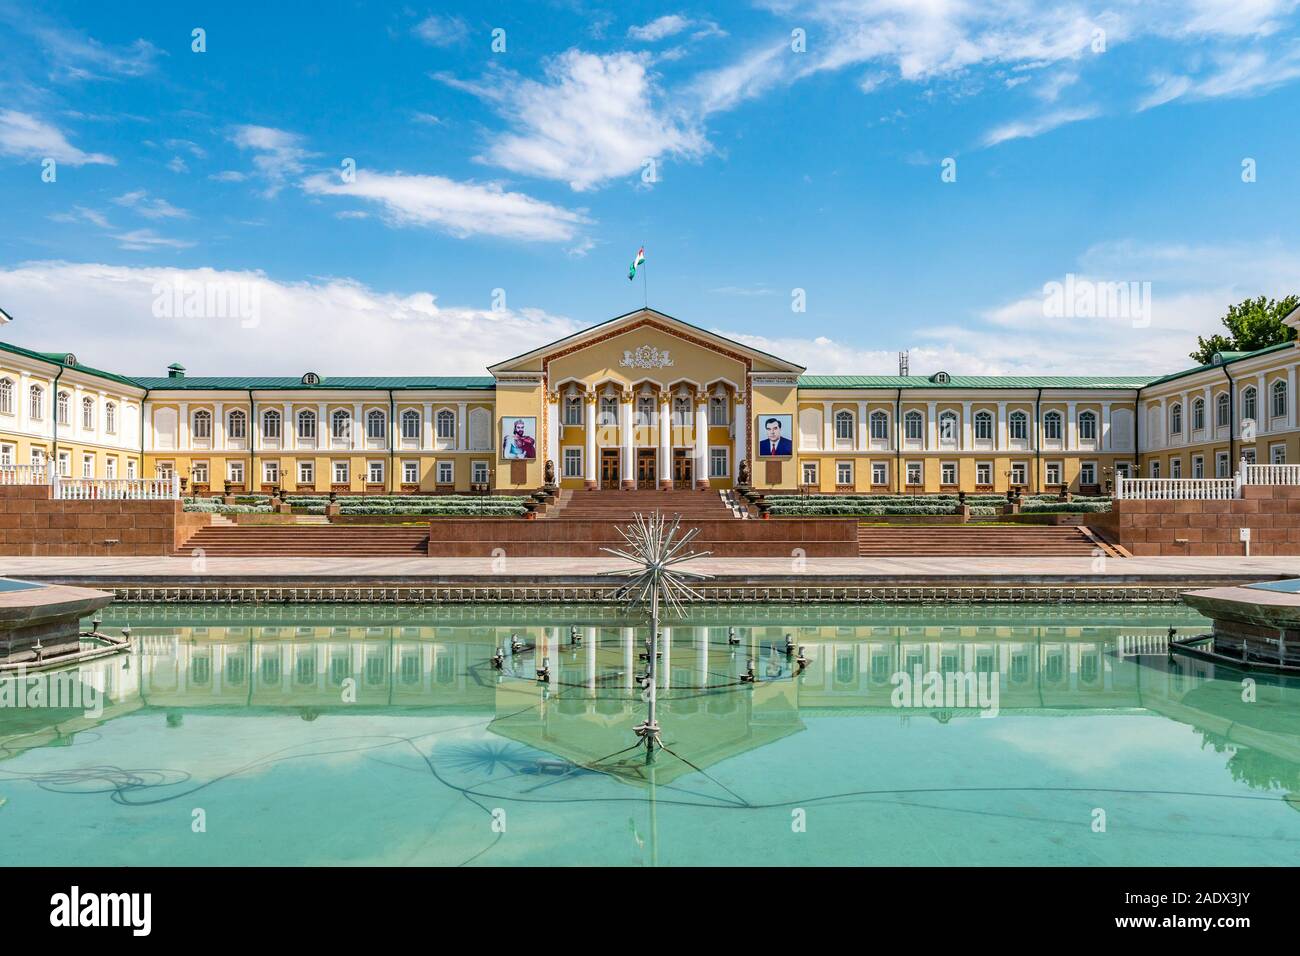 Khujand Arbob Cultural Palace View with Waving Tajikistan Flag and Portraits of Ismoil Somoni and President Emomali Rahmon on a Sunny Blue Sky Day Stock Photo